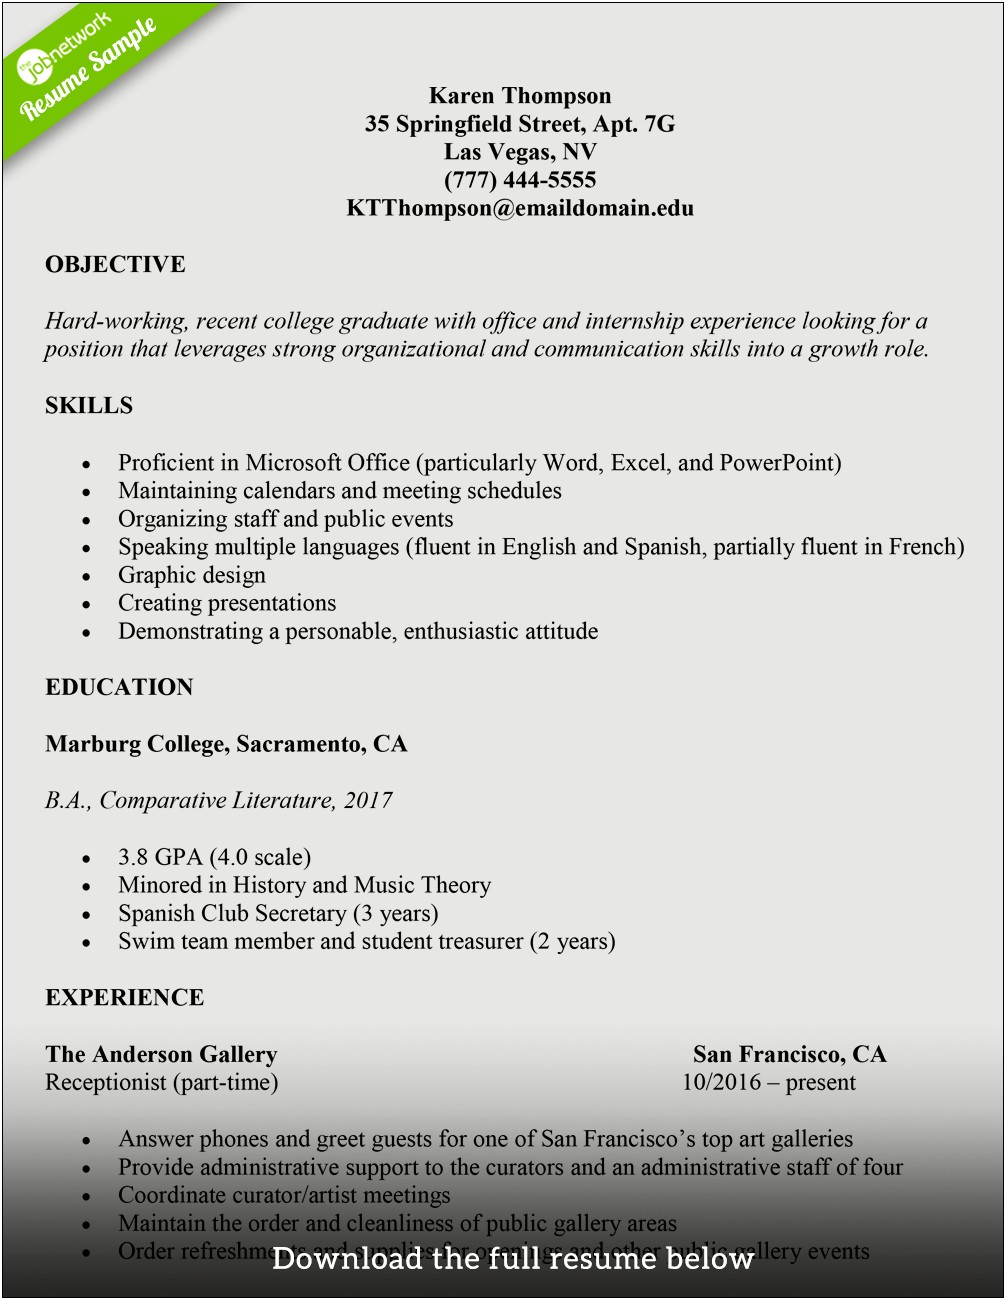 Resume Examples For College Students Education